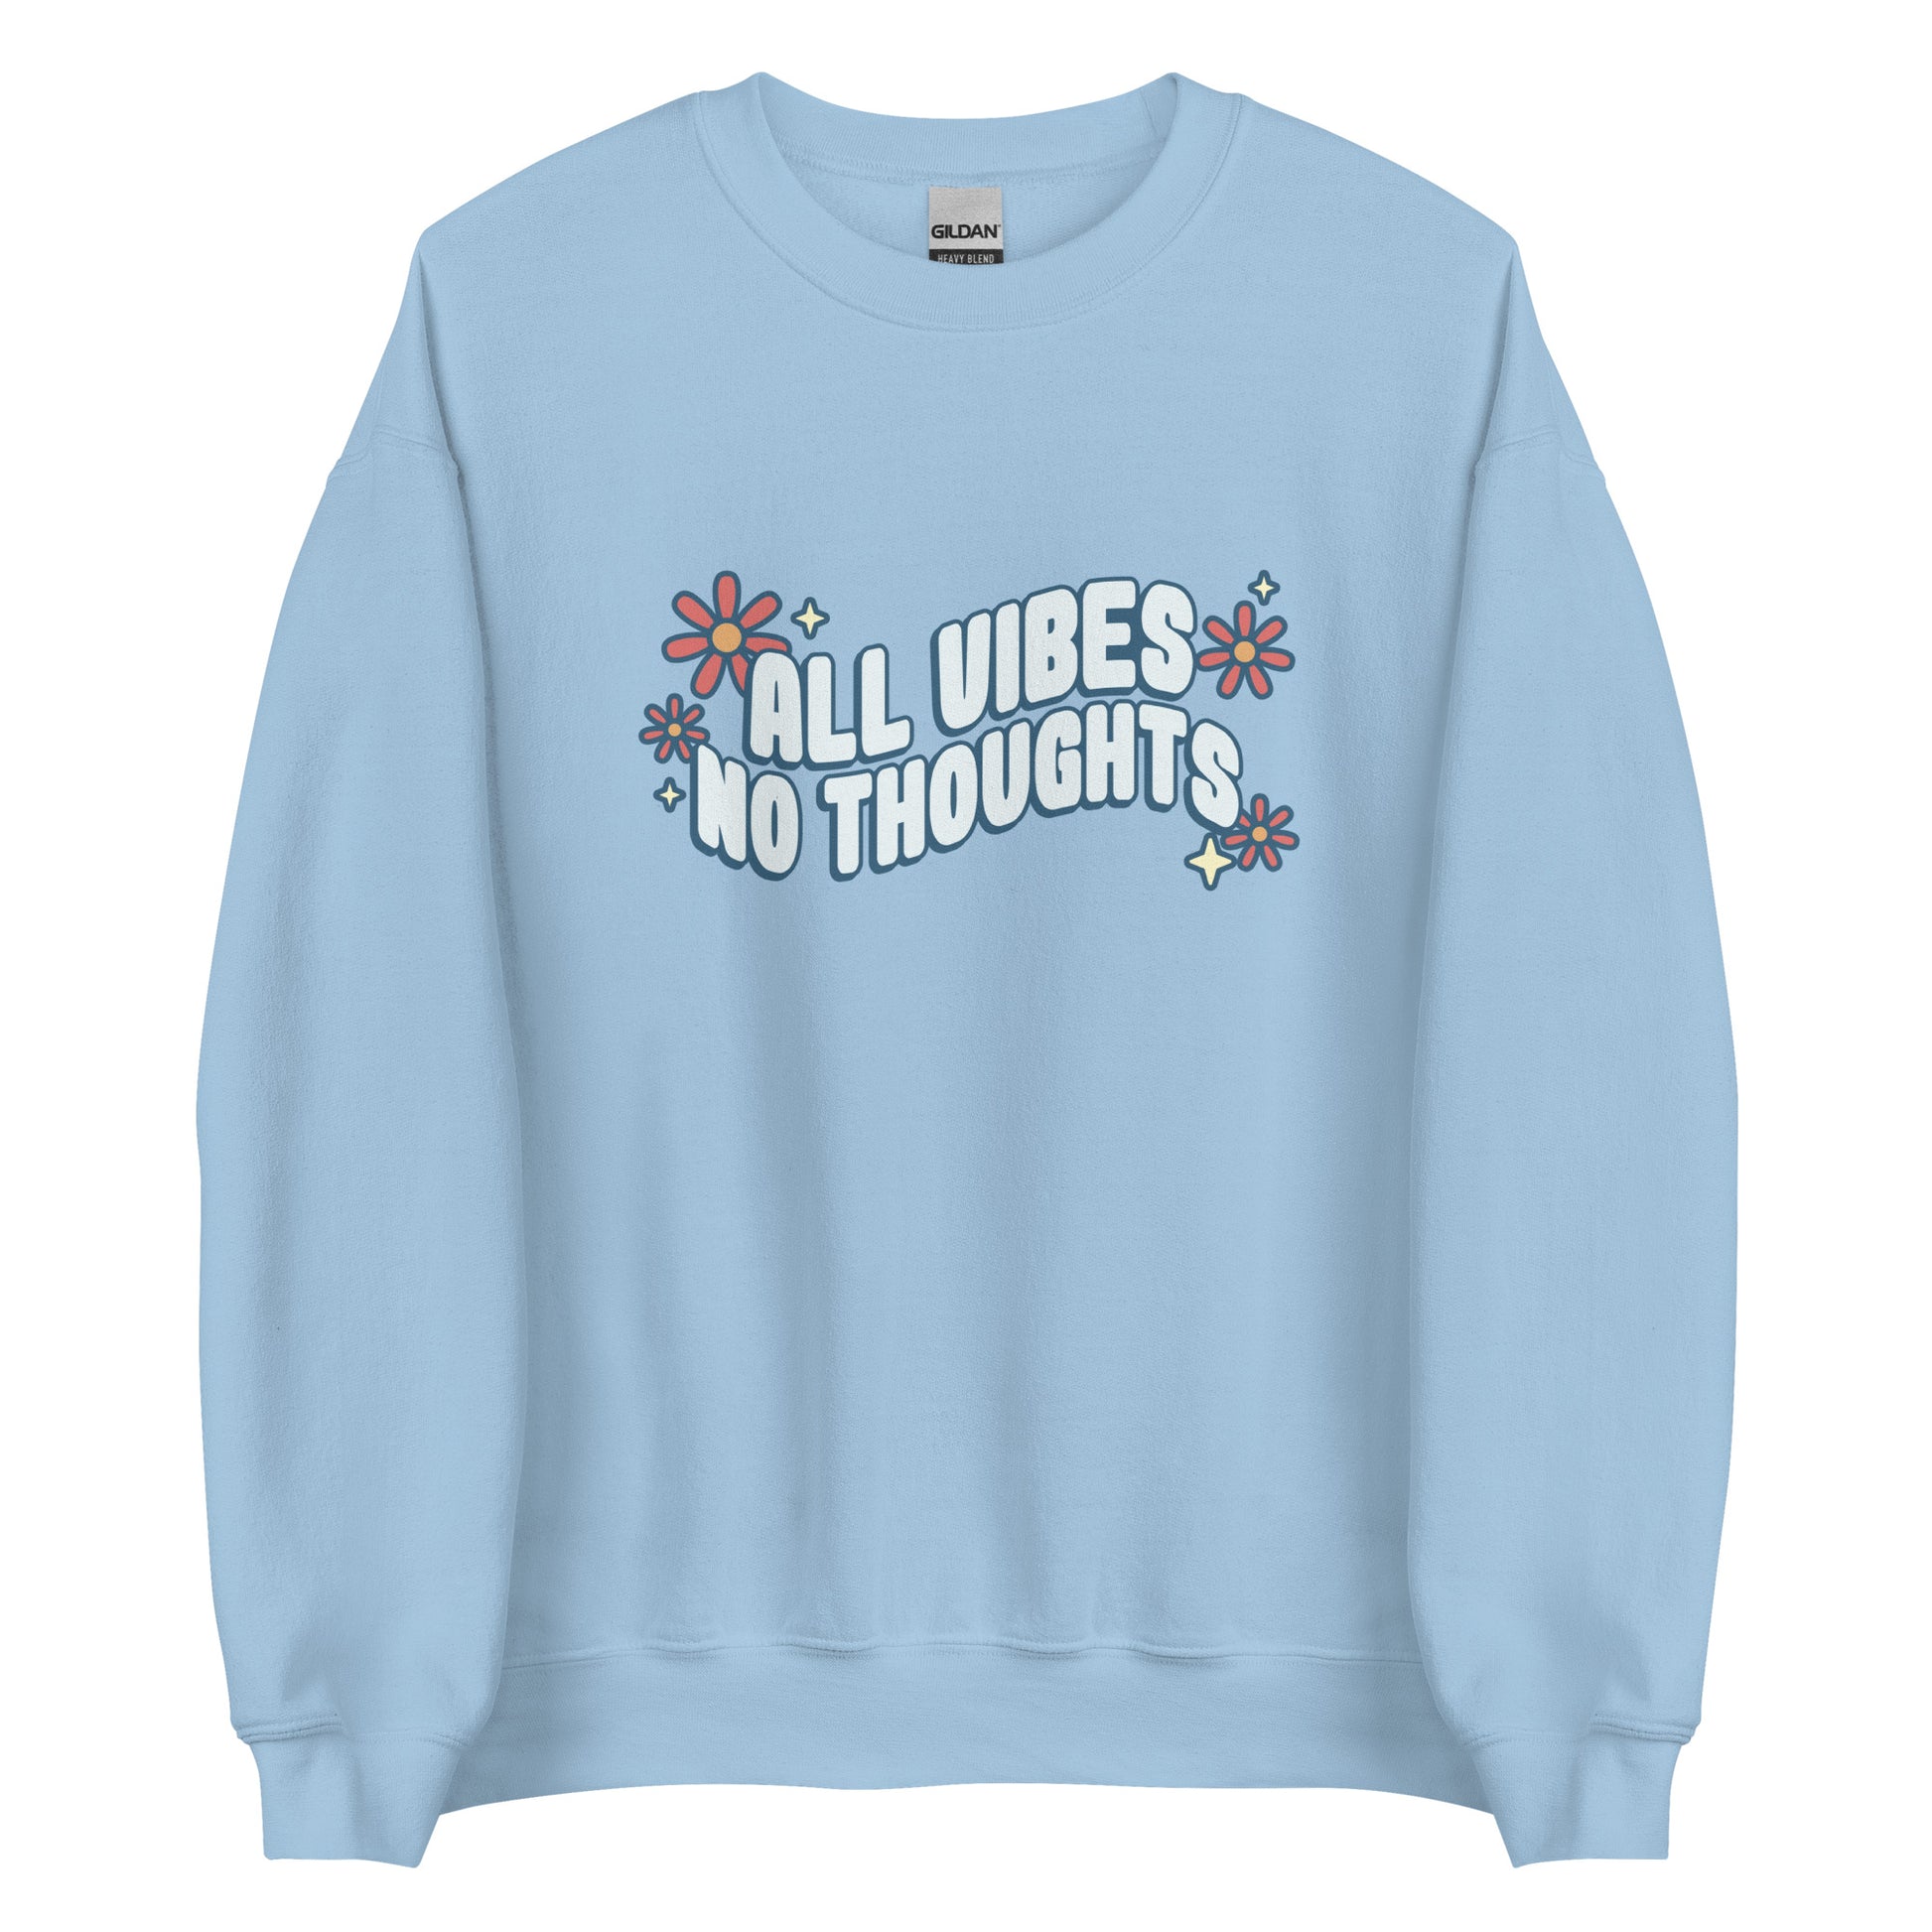 A light blue crewneck sweatshirt featuring text that reads "All vibes, no thoughts". Around the text are a few pink flowers and pale yellow sparkles.